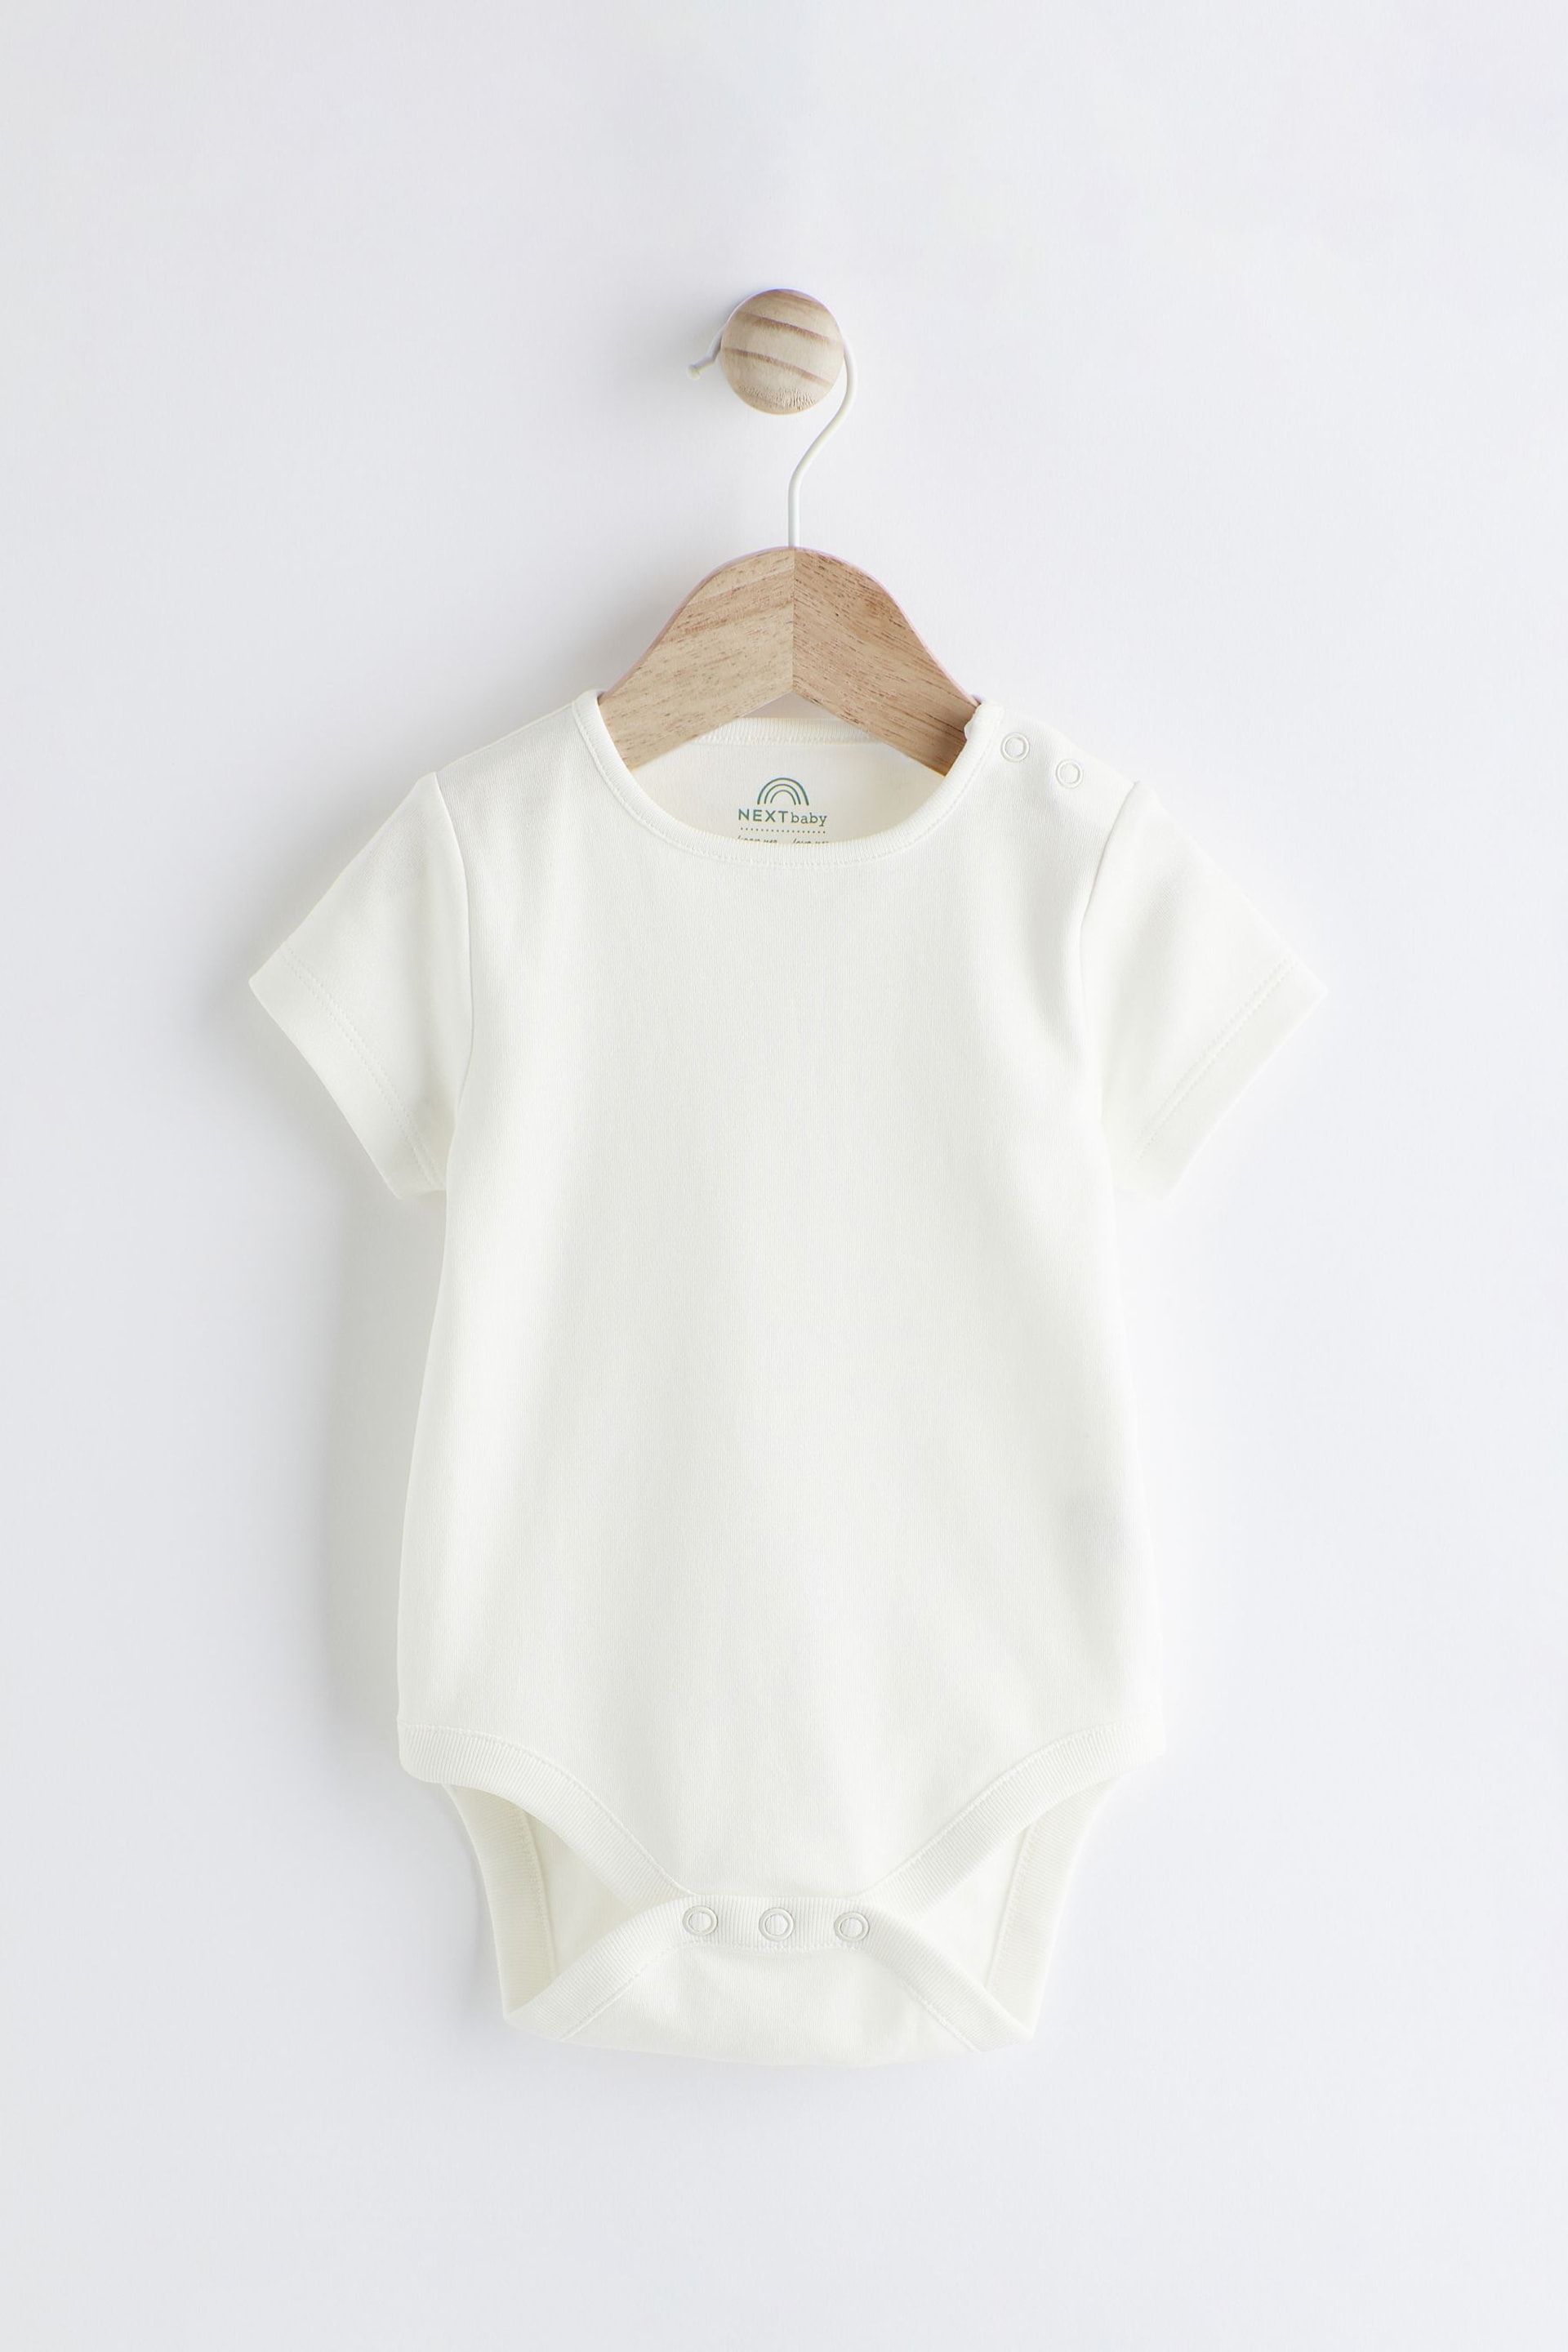 Green/White Checkerboard Baby Jersey Dungarees and Bodysuit Set (0mths-2yrs) - Image 6 of 10